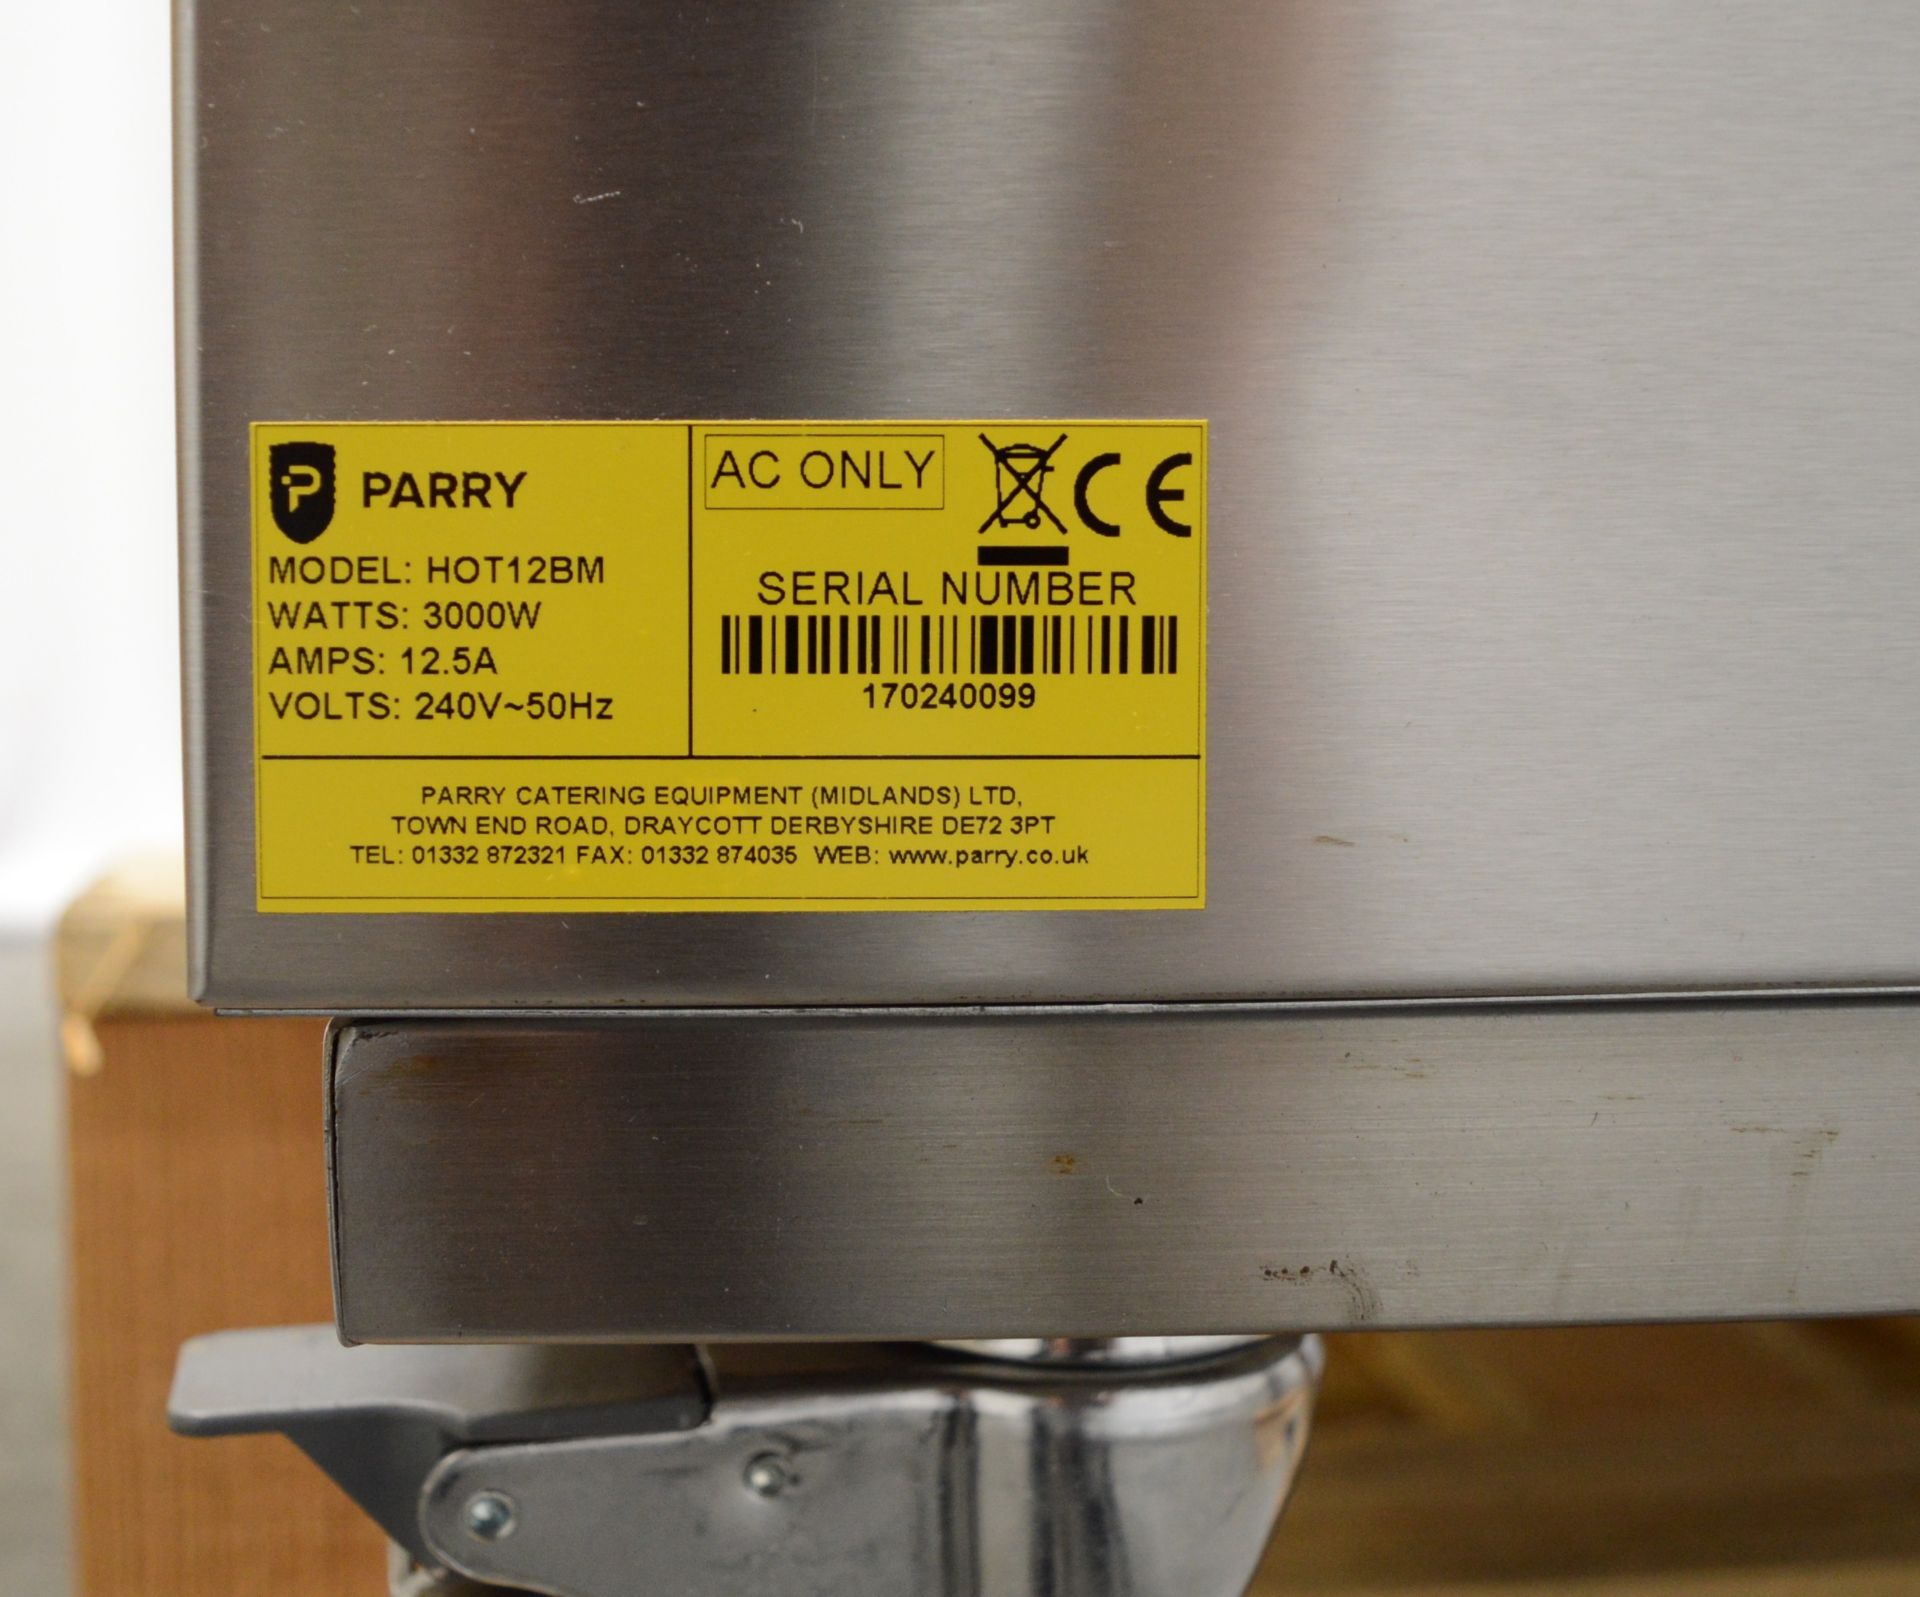 Parry HOT12BM stainless steel bain marie hot cupboard, 1200x650x900mm (LxDxH) 230v - Image 8 of 8